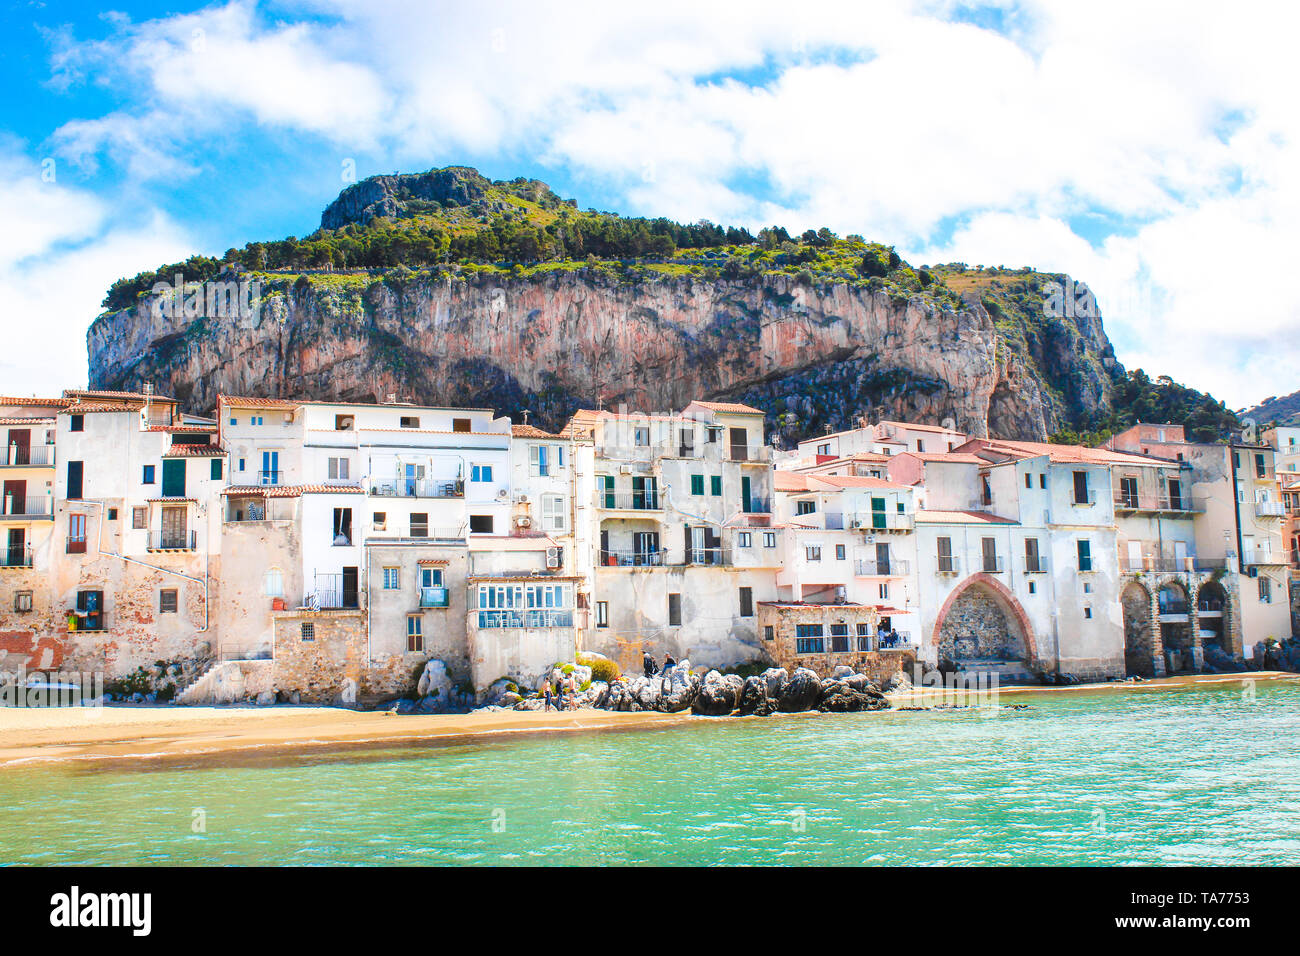 Amazing old houses on the coast of Tyrrhenian sea in beautiful Cefalu, Sicily, Italy. Behind the buildings marvelous rock overlooking the coast. The Sicilian city is a popular tourist attraction. Stock Photo